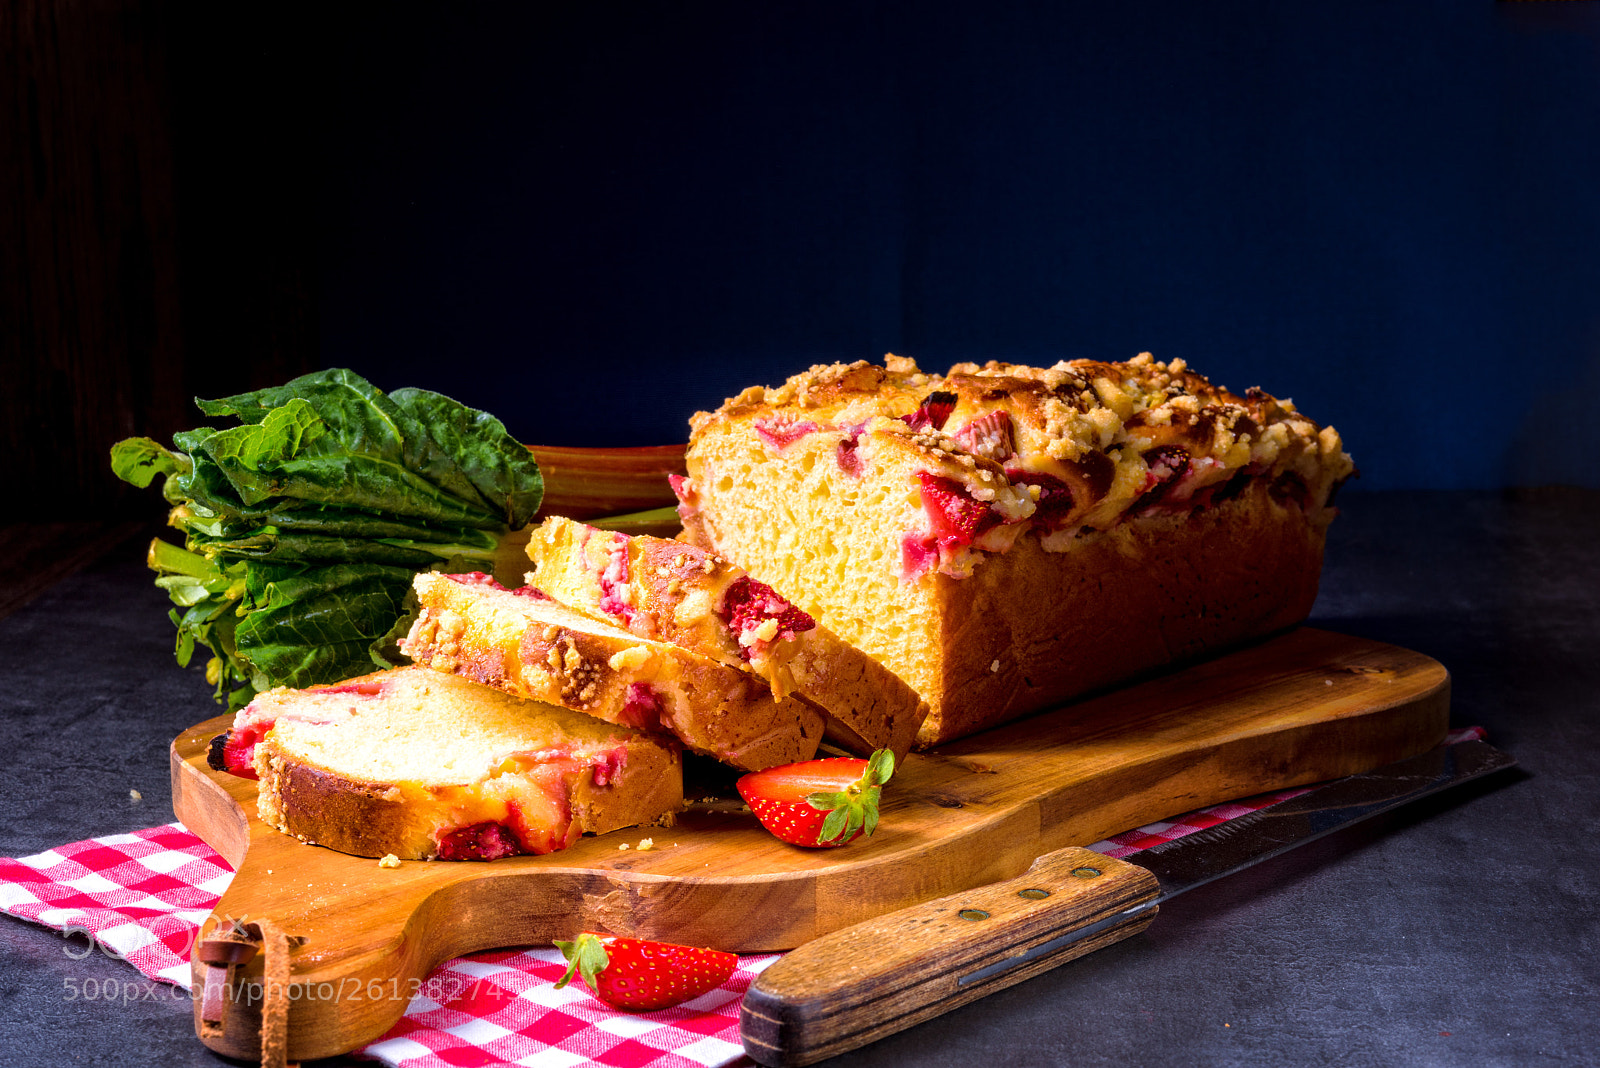 Nikon D810 sample photo. Brioches with rhubarb, strawberry photography